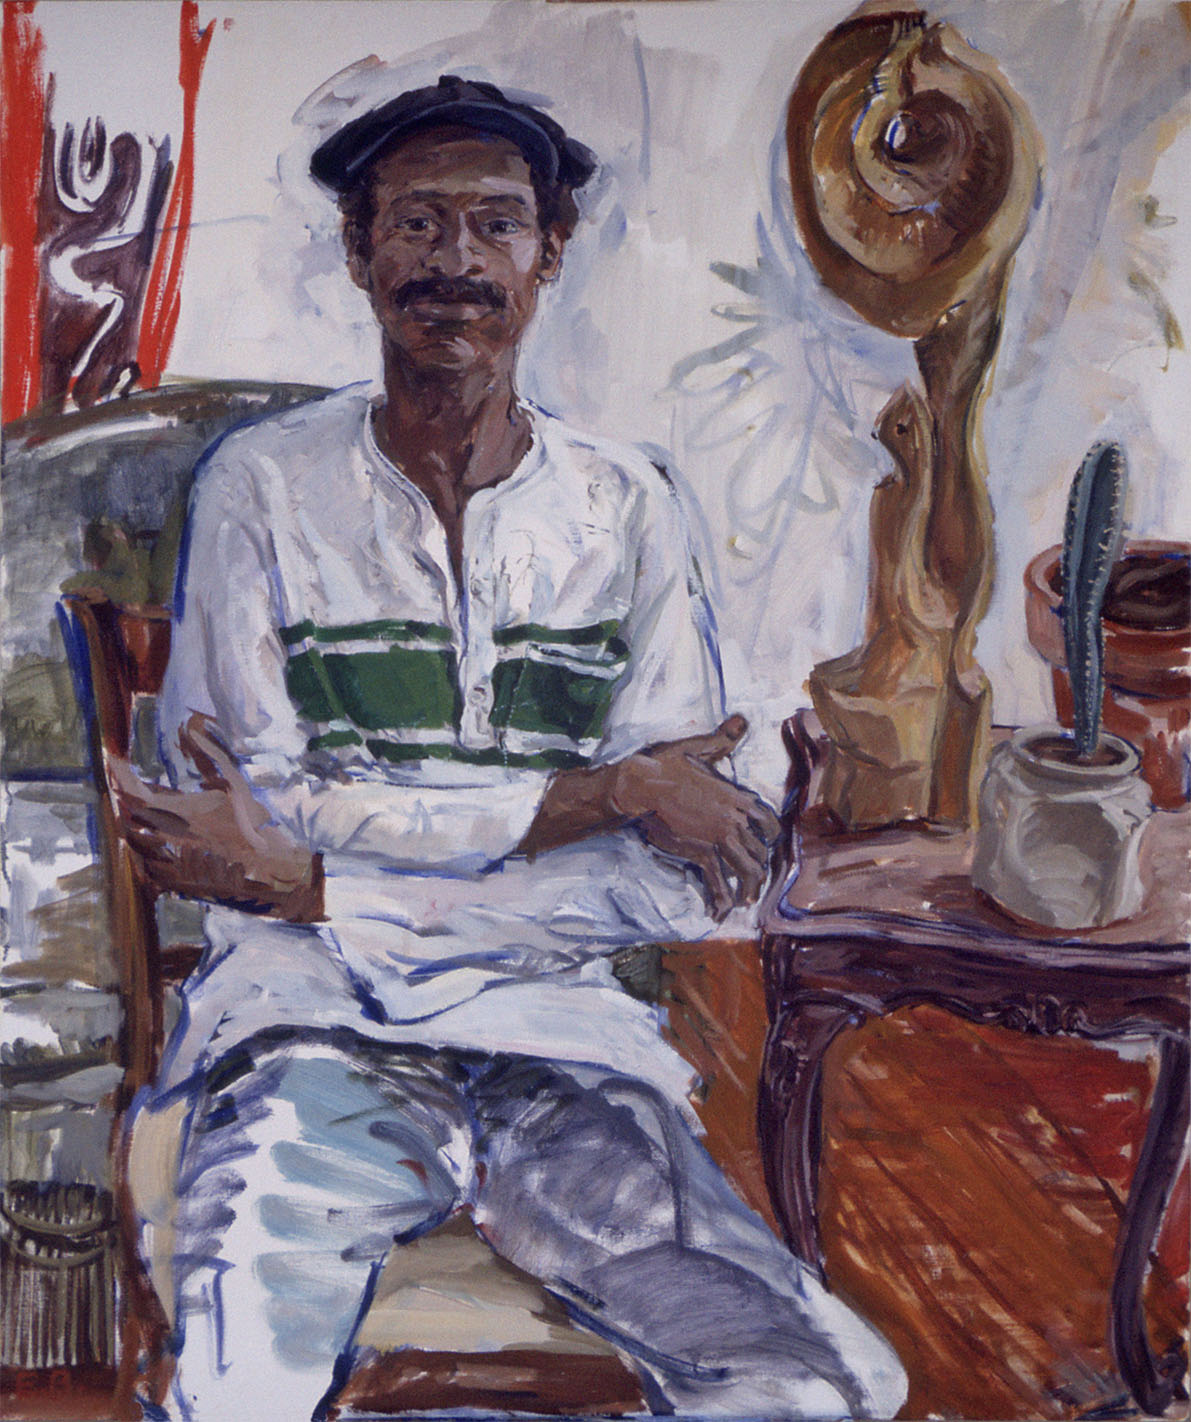  Emerson Bell, 1978, Oil on Canvas, 48” x 44” 